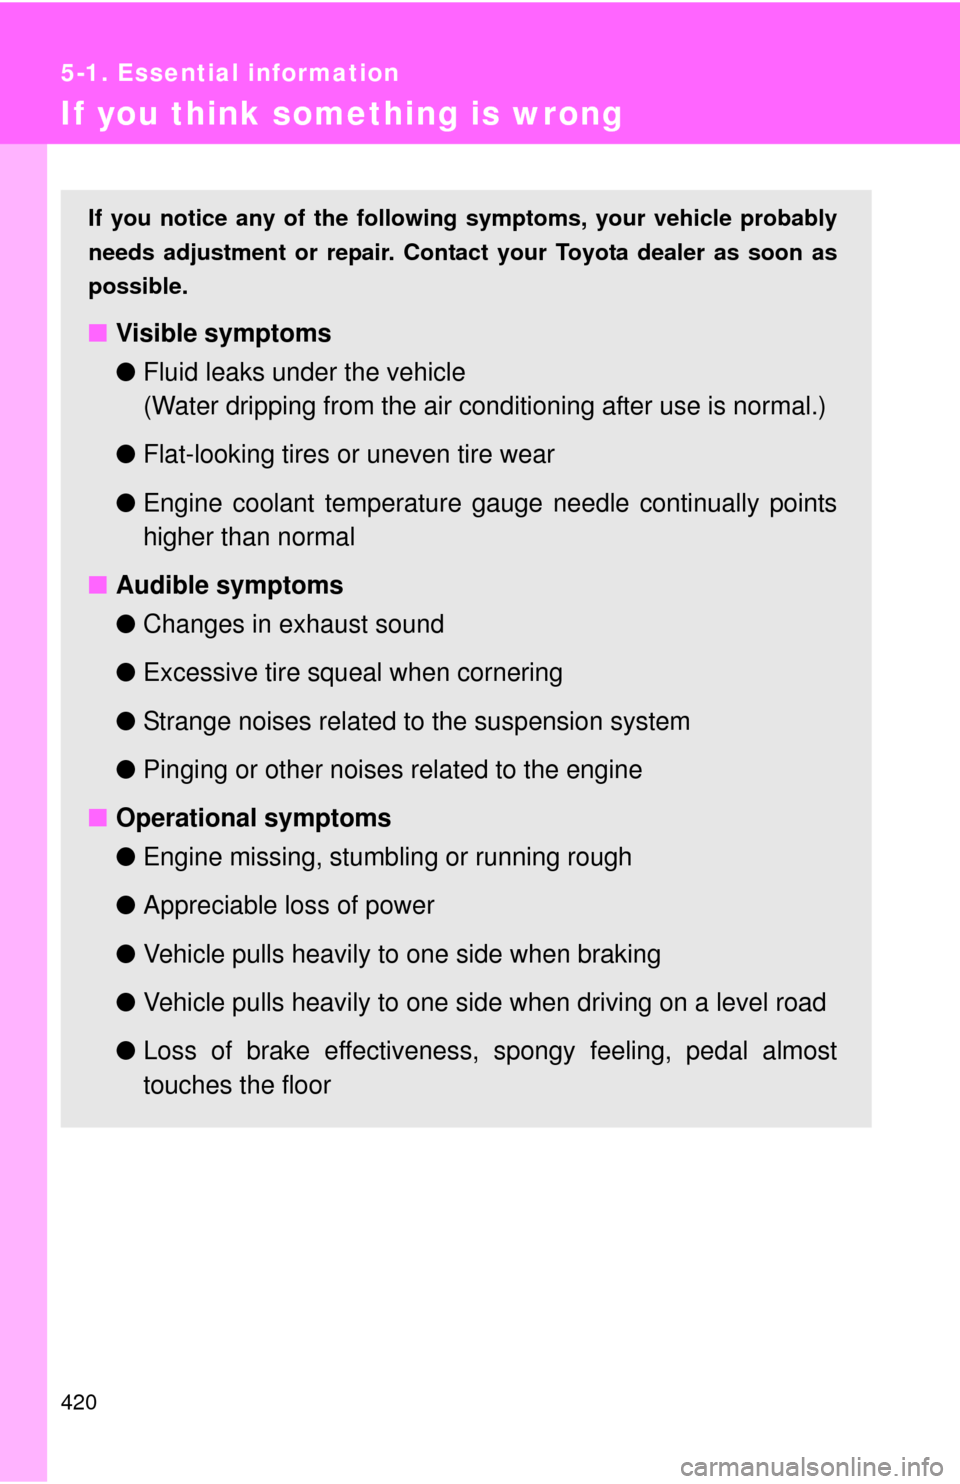 TOYOTA COROLLA 2011 10.G Owners Manual 420
5-1. Essential information
If you think something is wrong
If you notice any of the following symptoms, your vehicle probably
needs adjustment or repair. Contact your Toyota dealer as soon as
poss